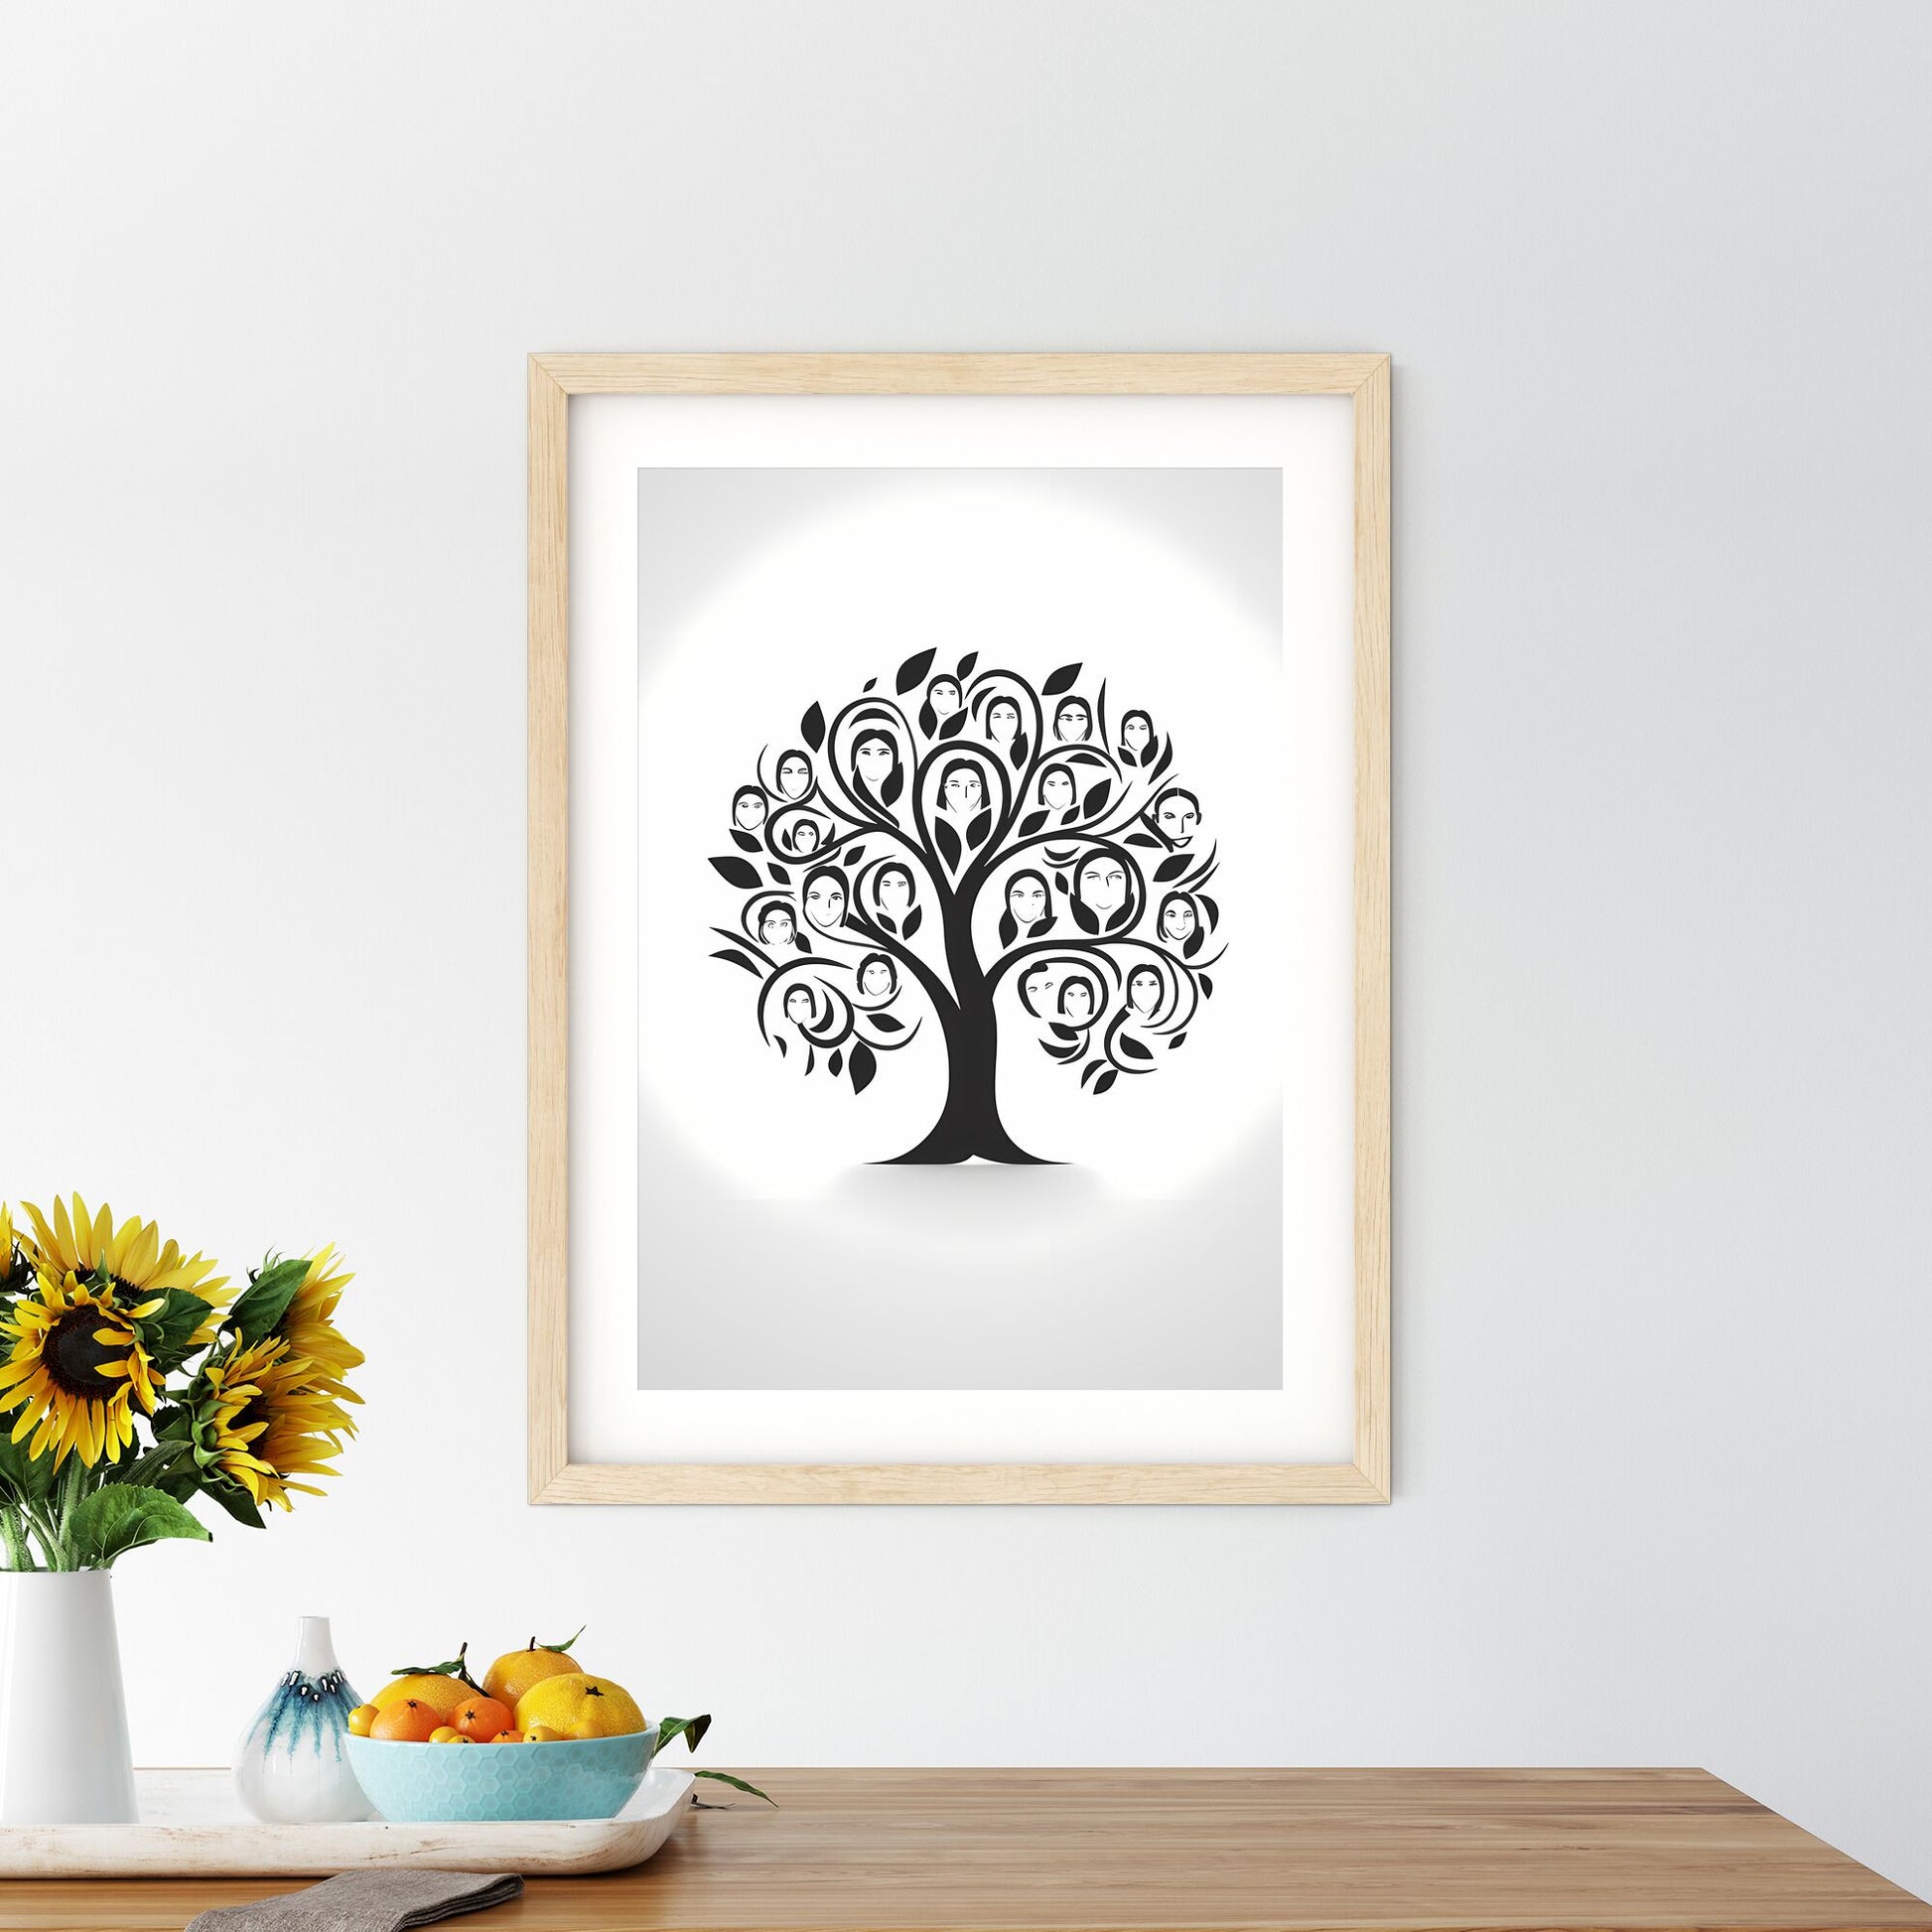 Black Tree With People Faces Art Print Default Title